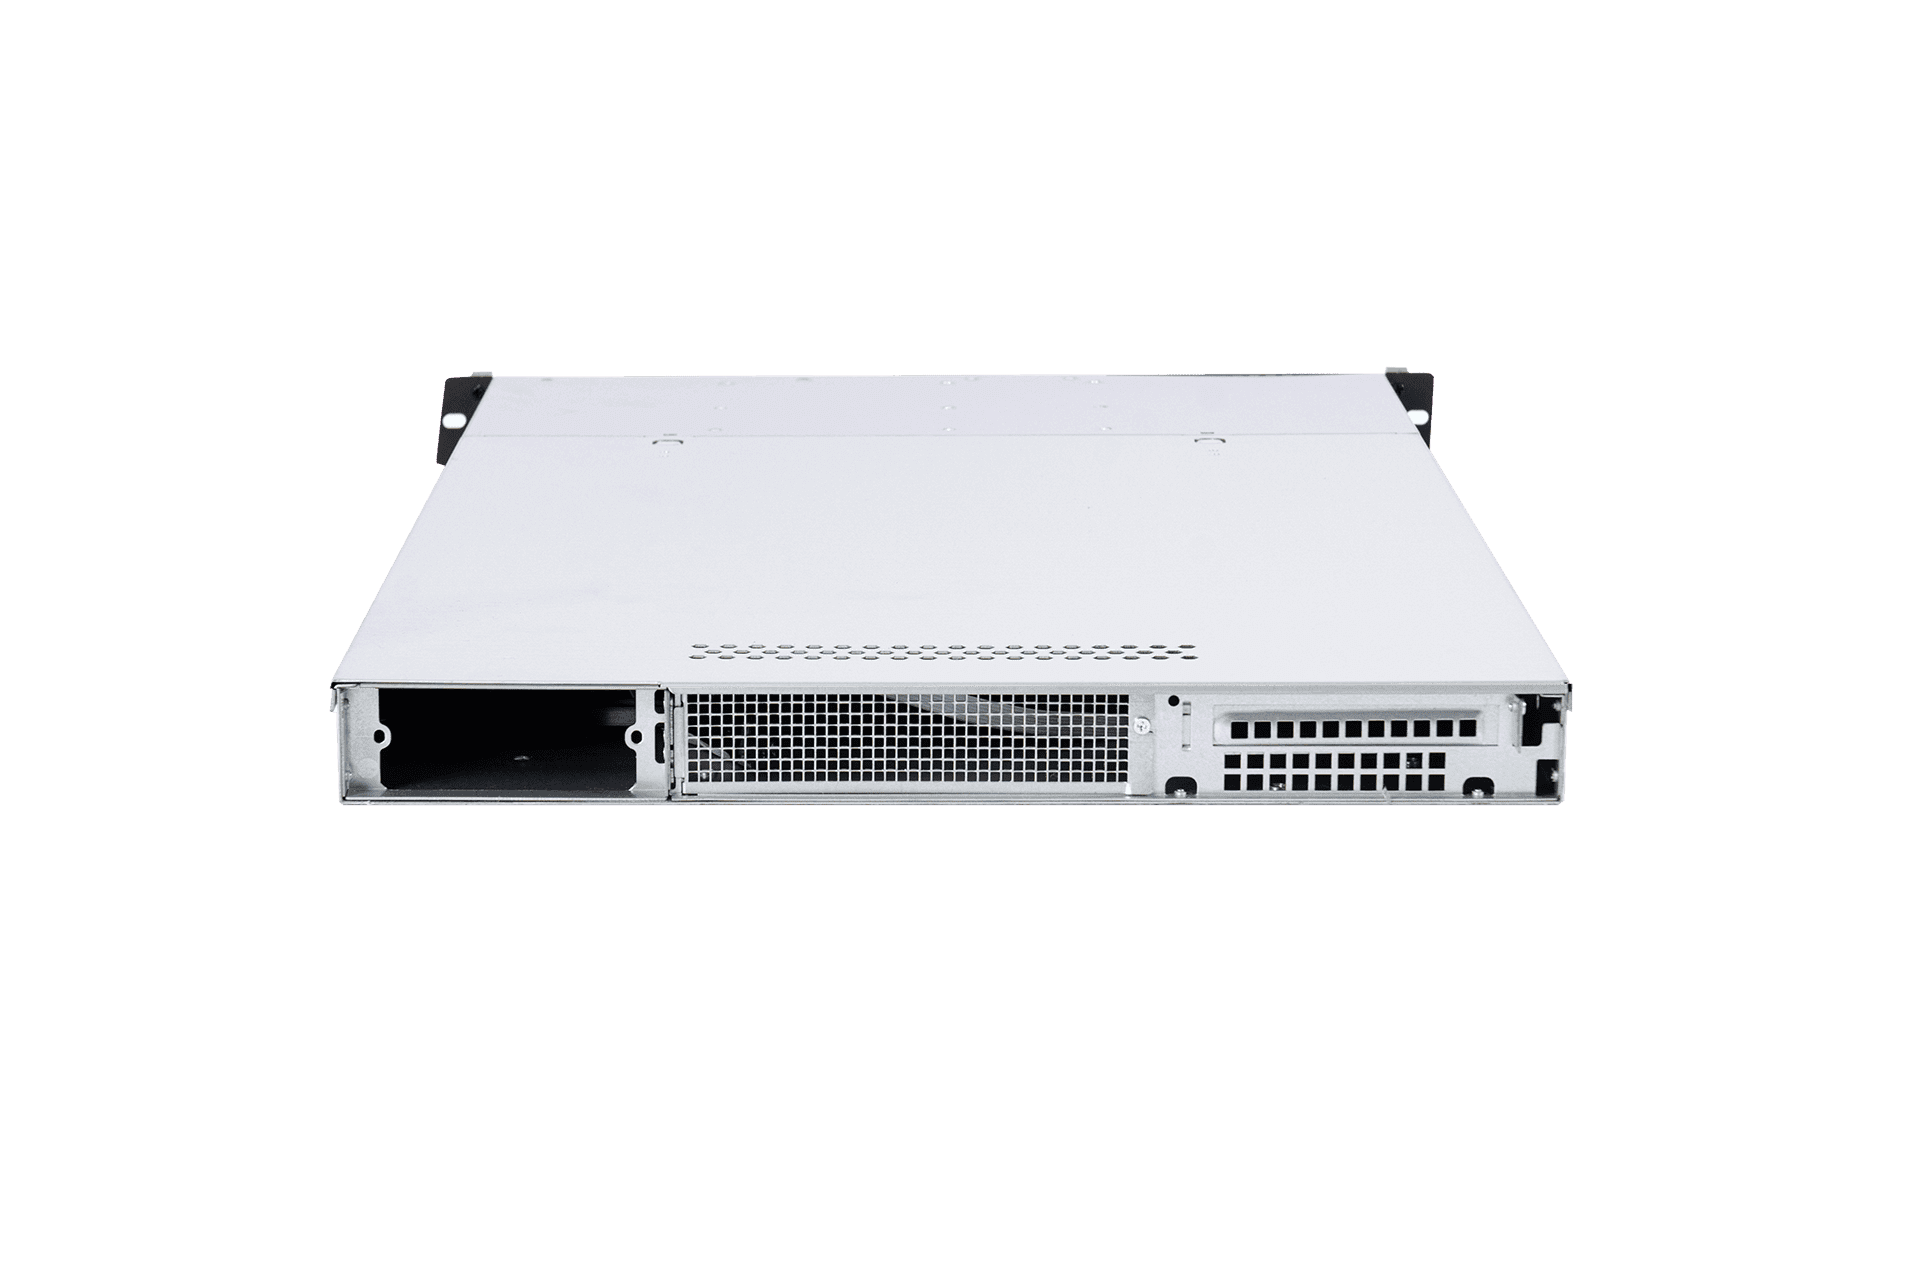 Server Chassis 1U 4 hard drive bays Hot-Swap for motherboard size up to 12"x13" backplane with optional MiniSAS-8087/8643/SATA interface